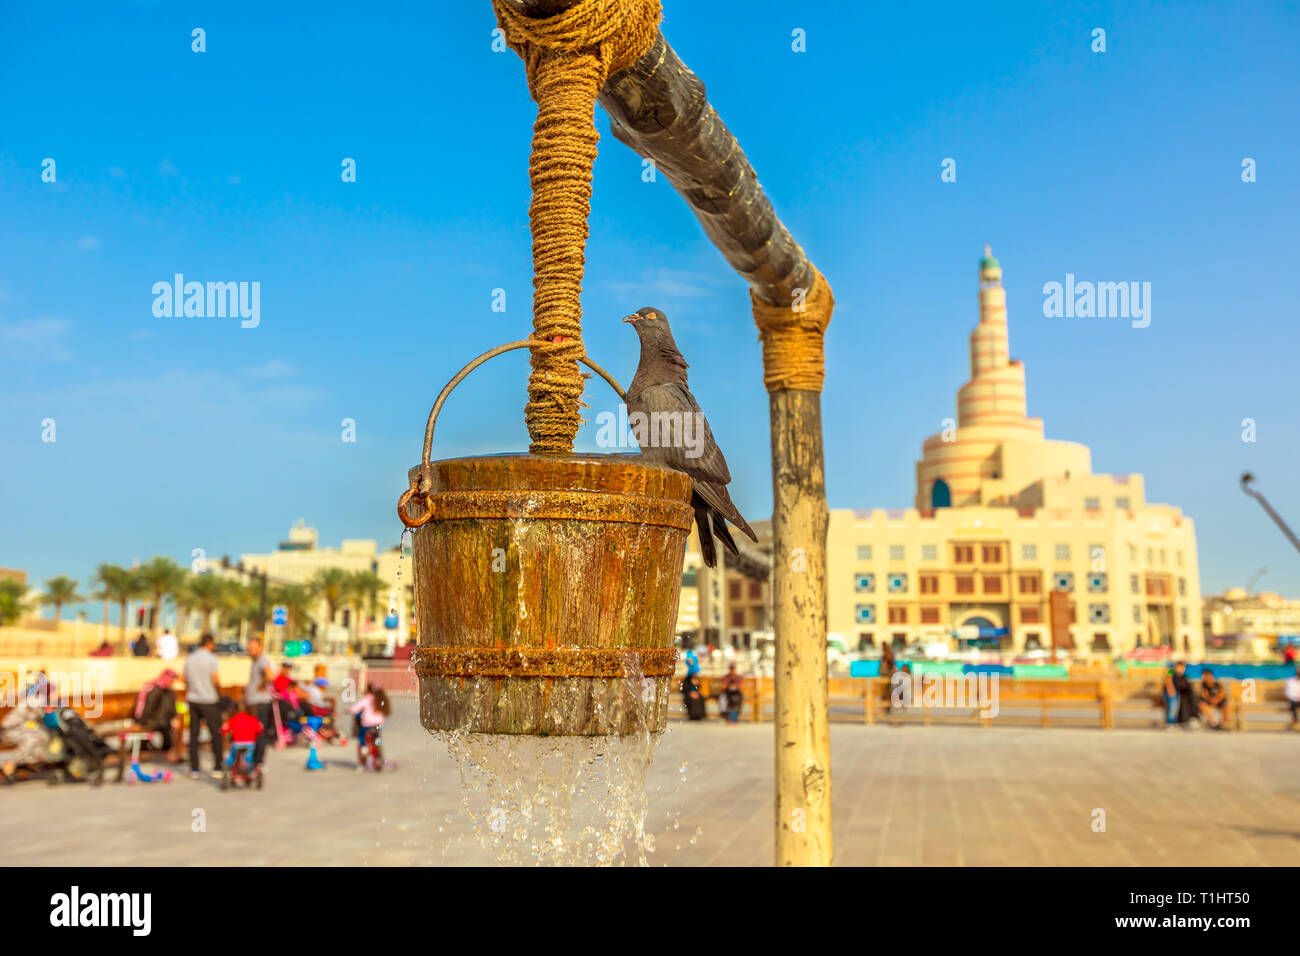 Pigeon at old well fountain on foreground at blue sky, iconic landmark in the middle of Souq Waqif, Doha center, Qatar. Middle East, Arabian Peninsula Stock Photo